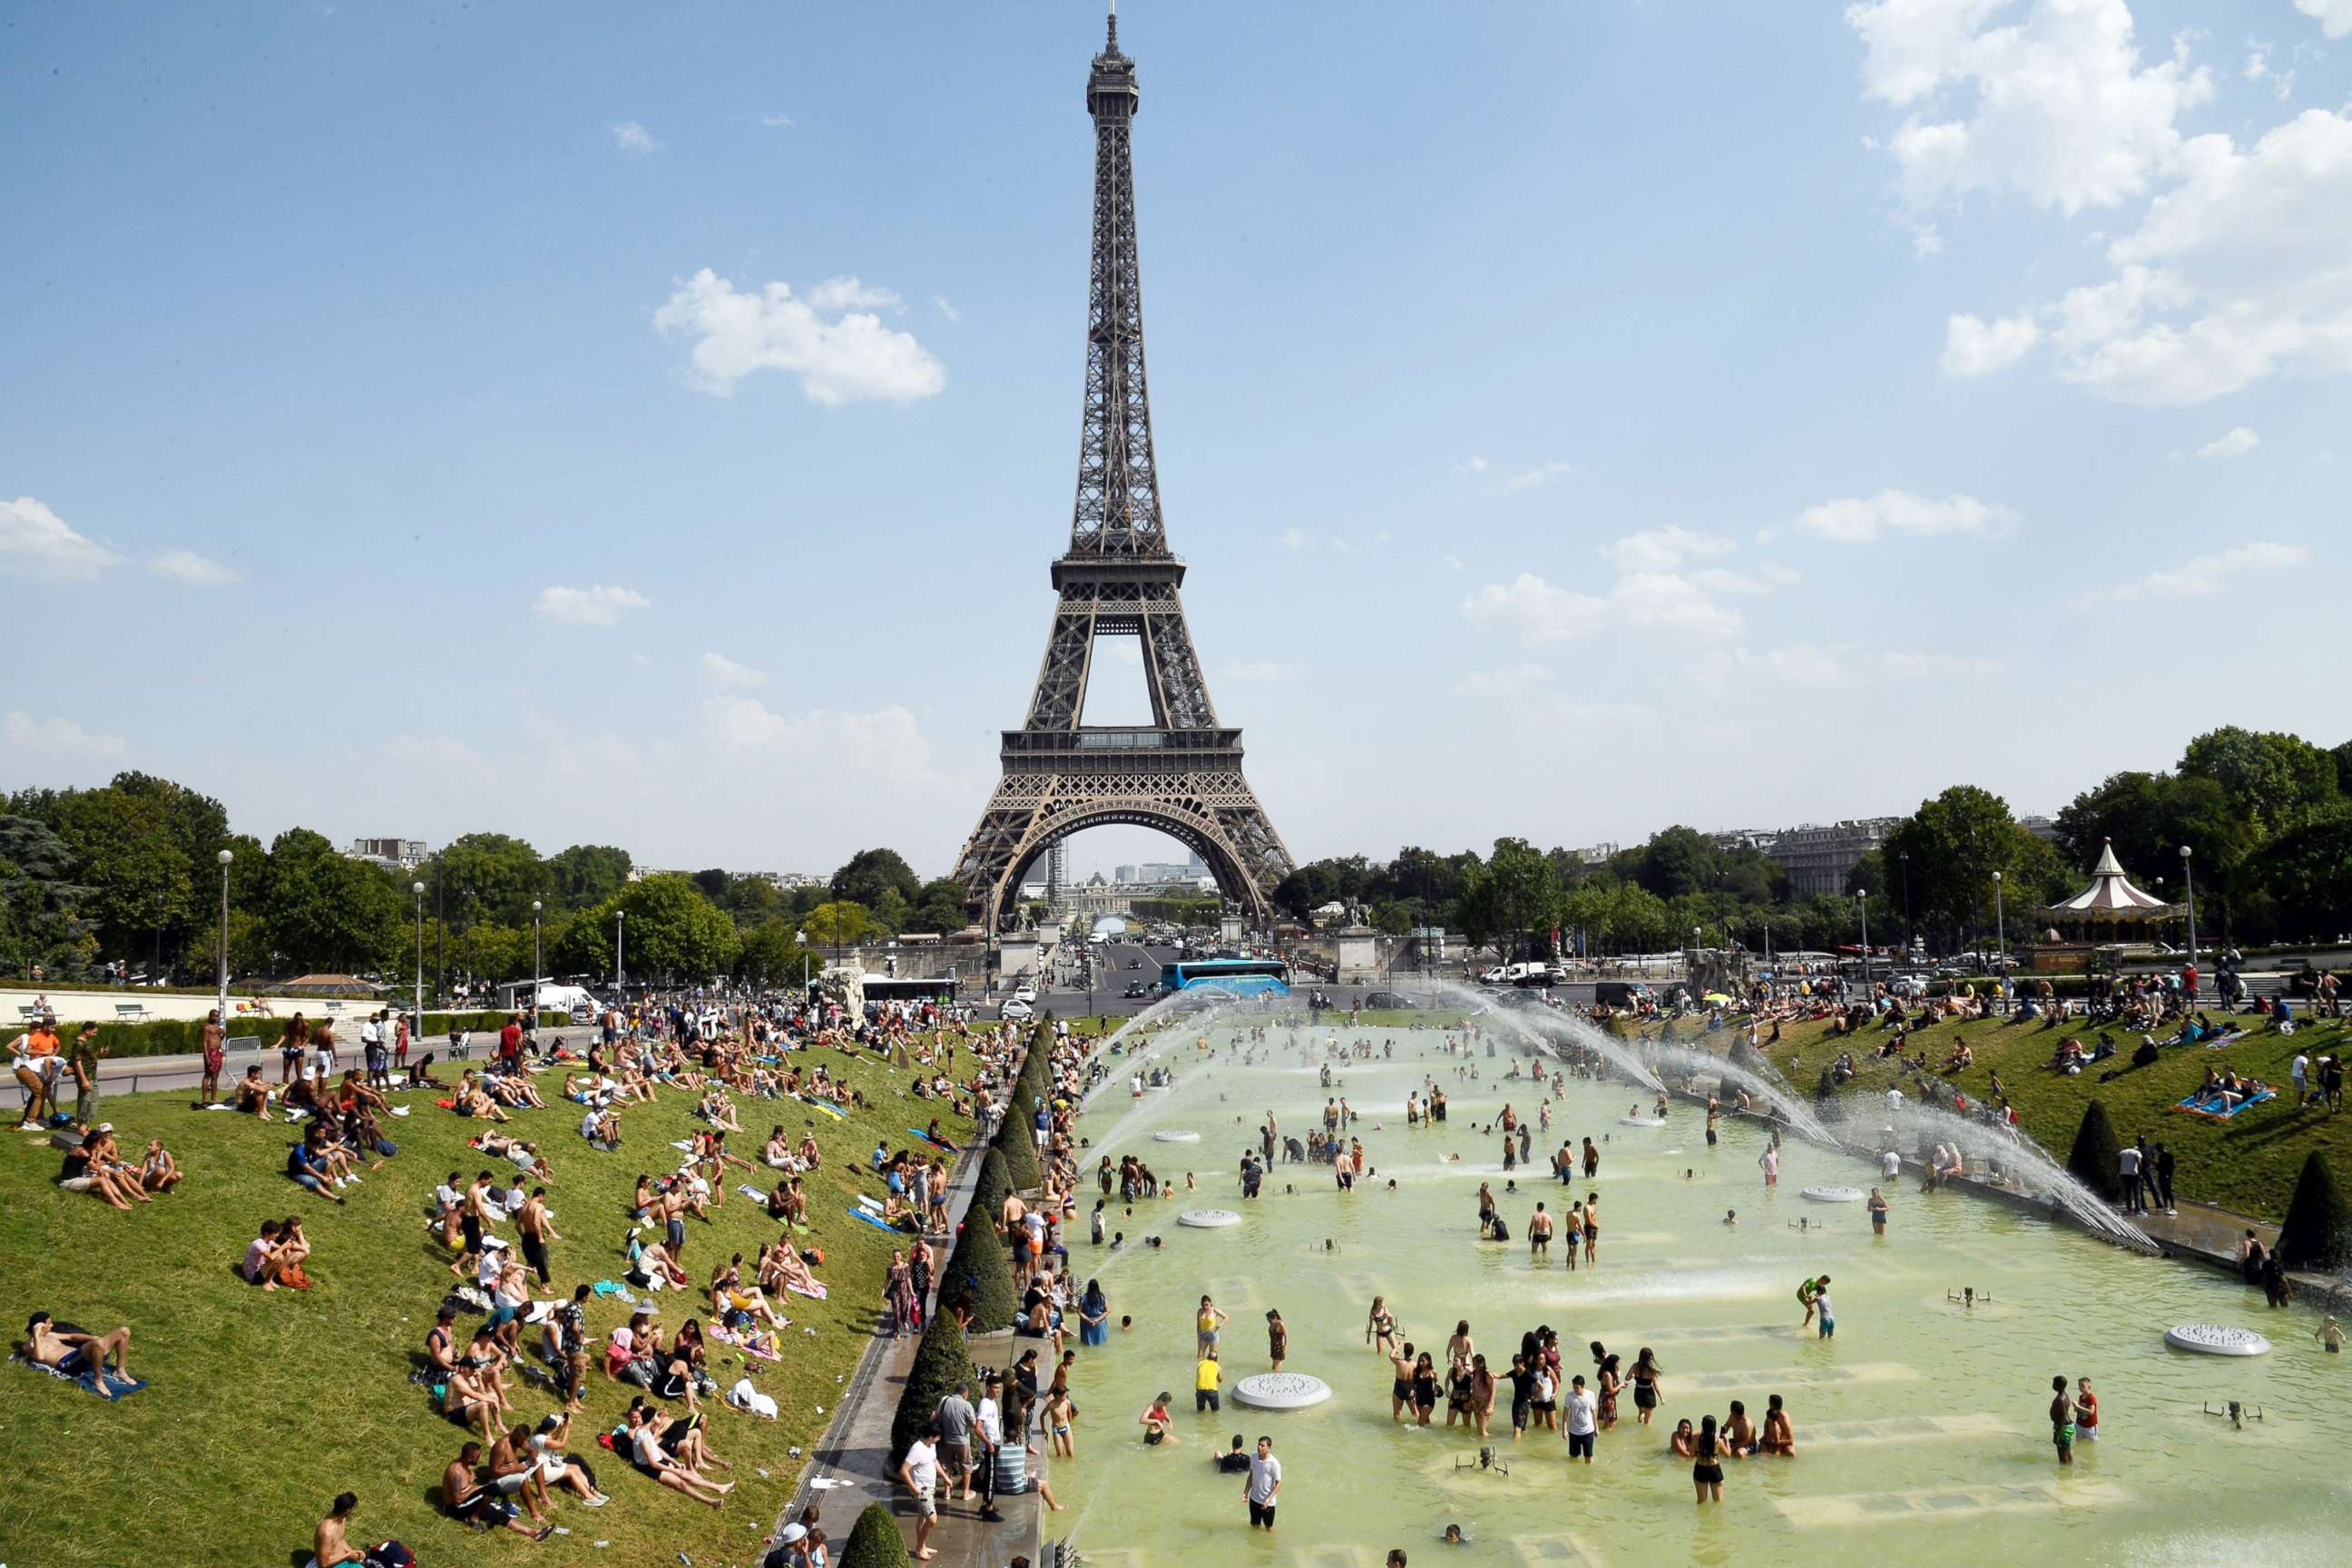 PHOTO:People cool off and sunbathe by the Trocadero Fountains next to the Eiffel Tower in Paris, on July 25, 2019 as a new heatwave hits the French capital.